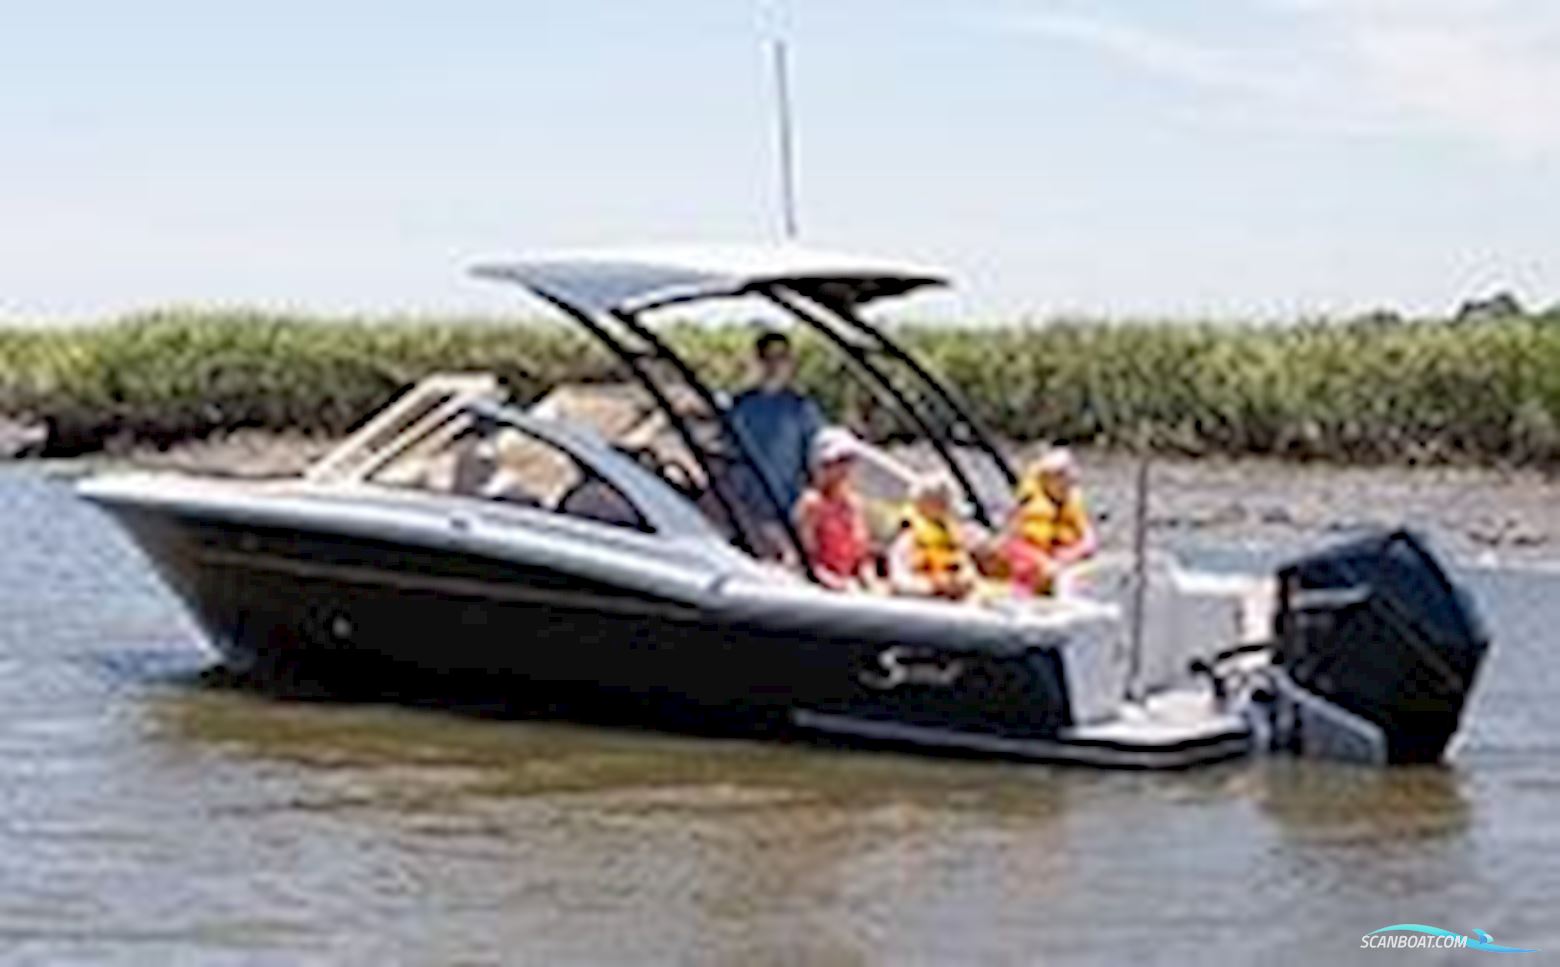 Scout 240 Dorado Motor boat 2020, with Scout engine, The Netherlands